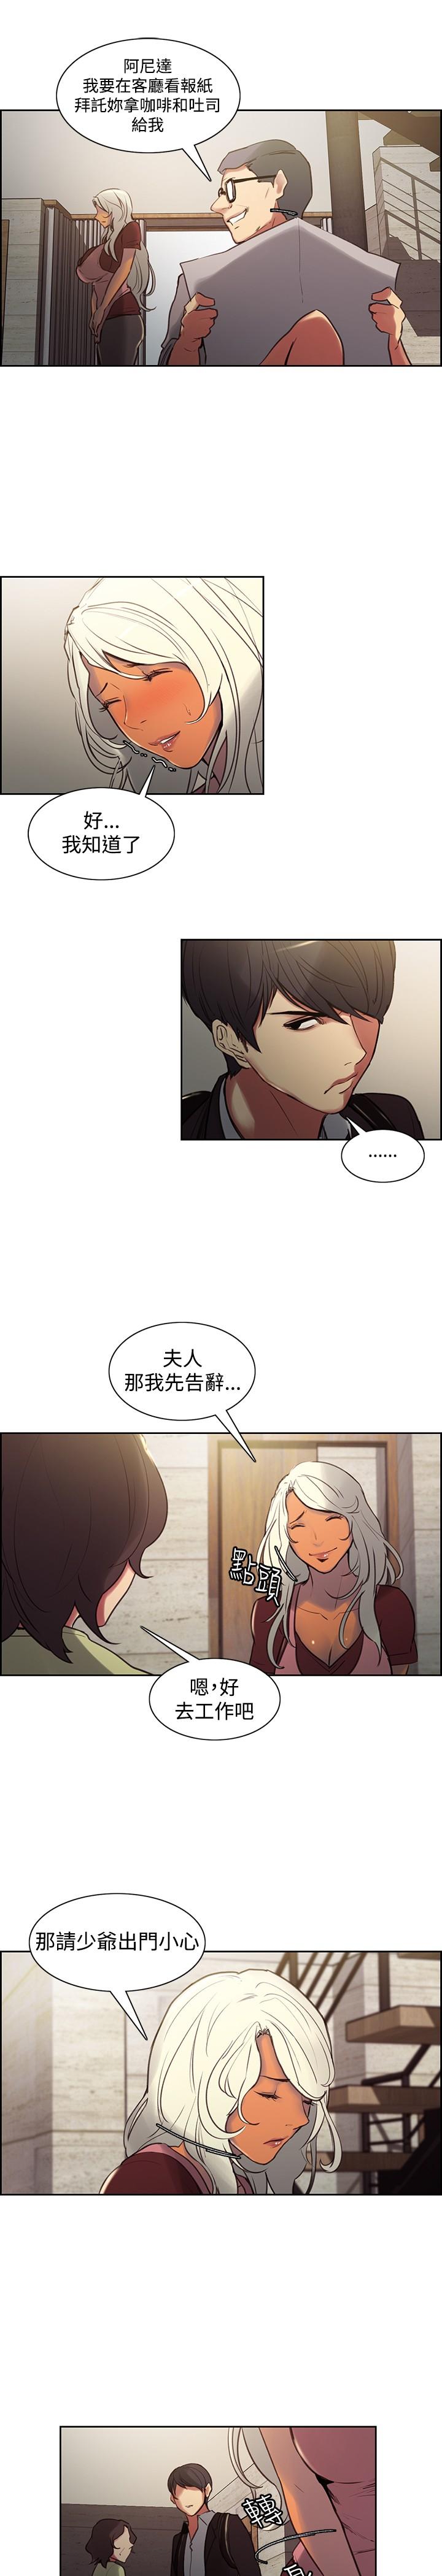 [Serious] Domesticate the Housekeeper 调教家政妇 Ch.29~44END [Chinese]中文 128